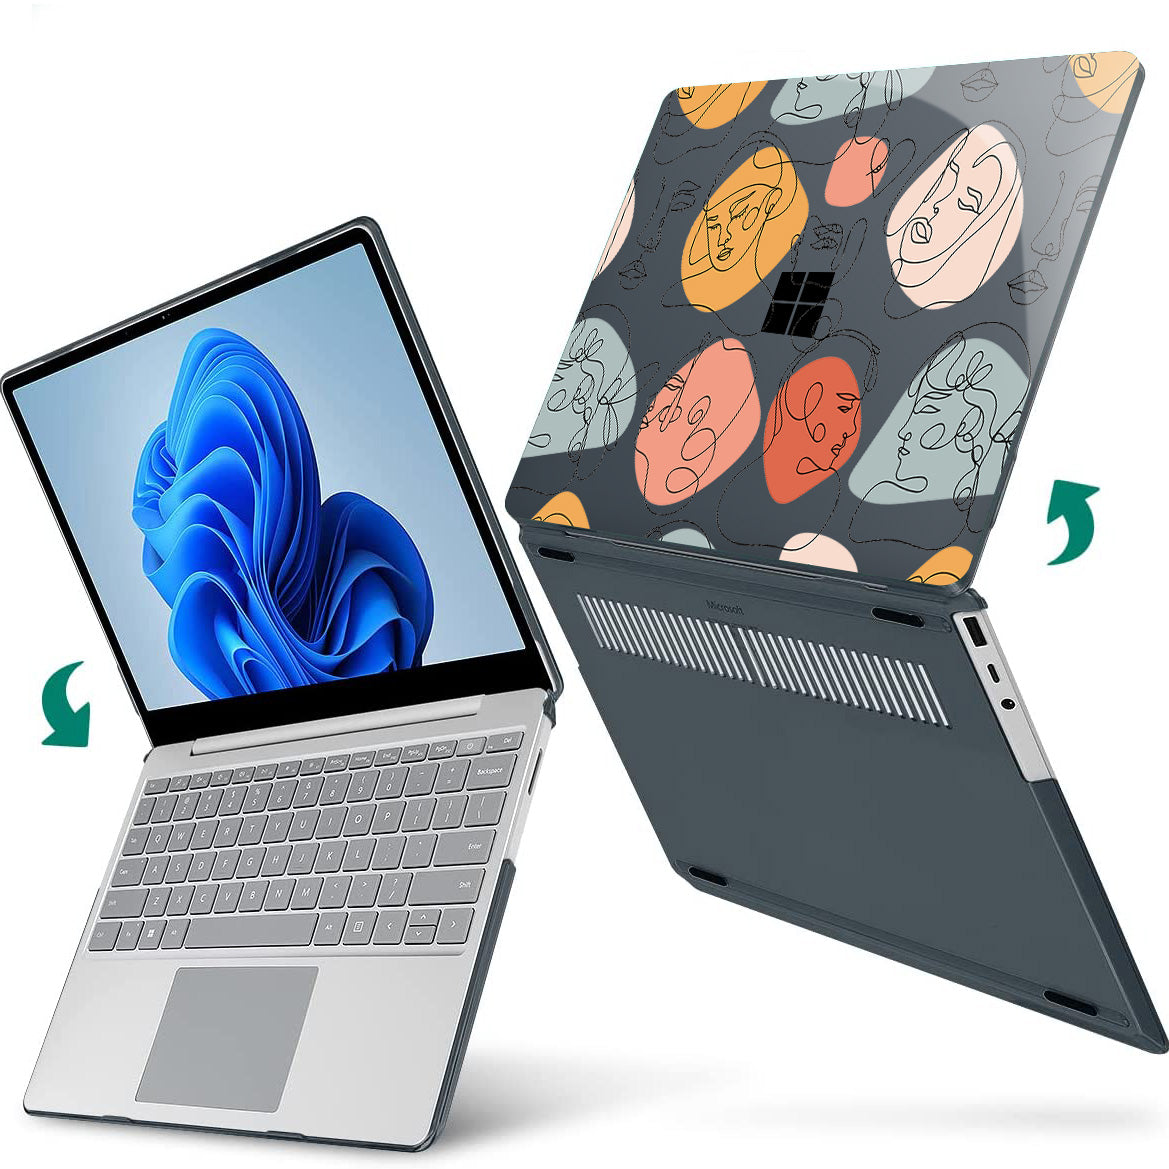 Abstract Face Microsoft Surface Laptop Case